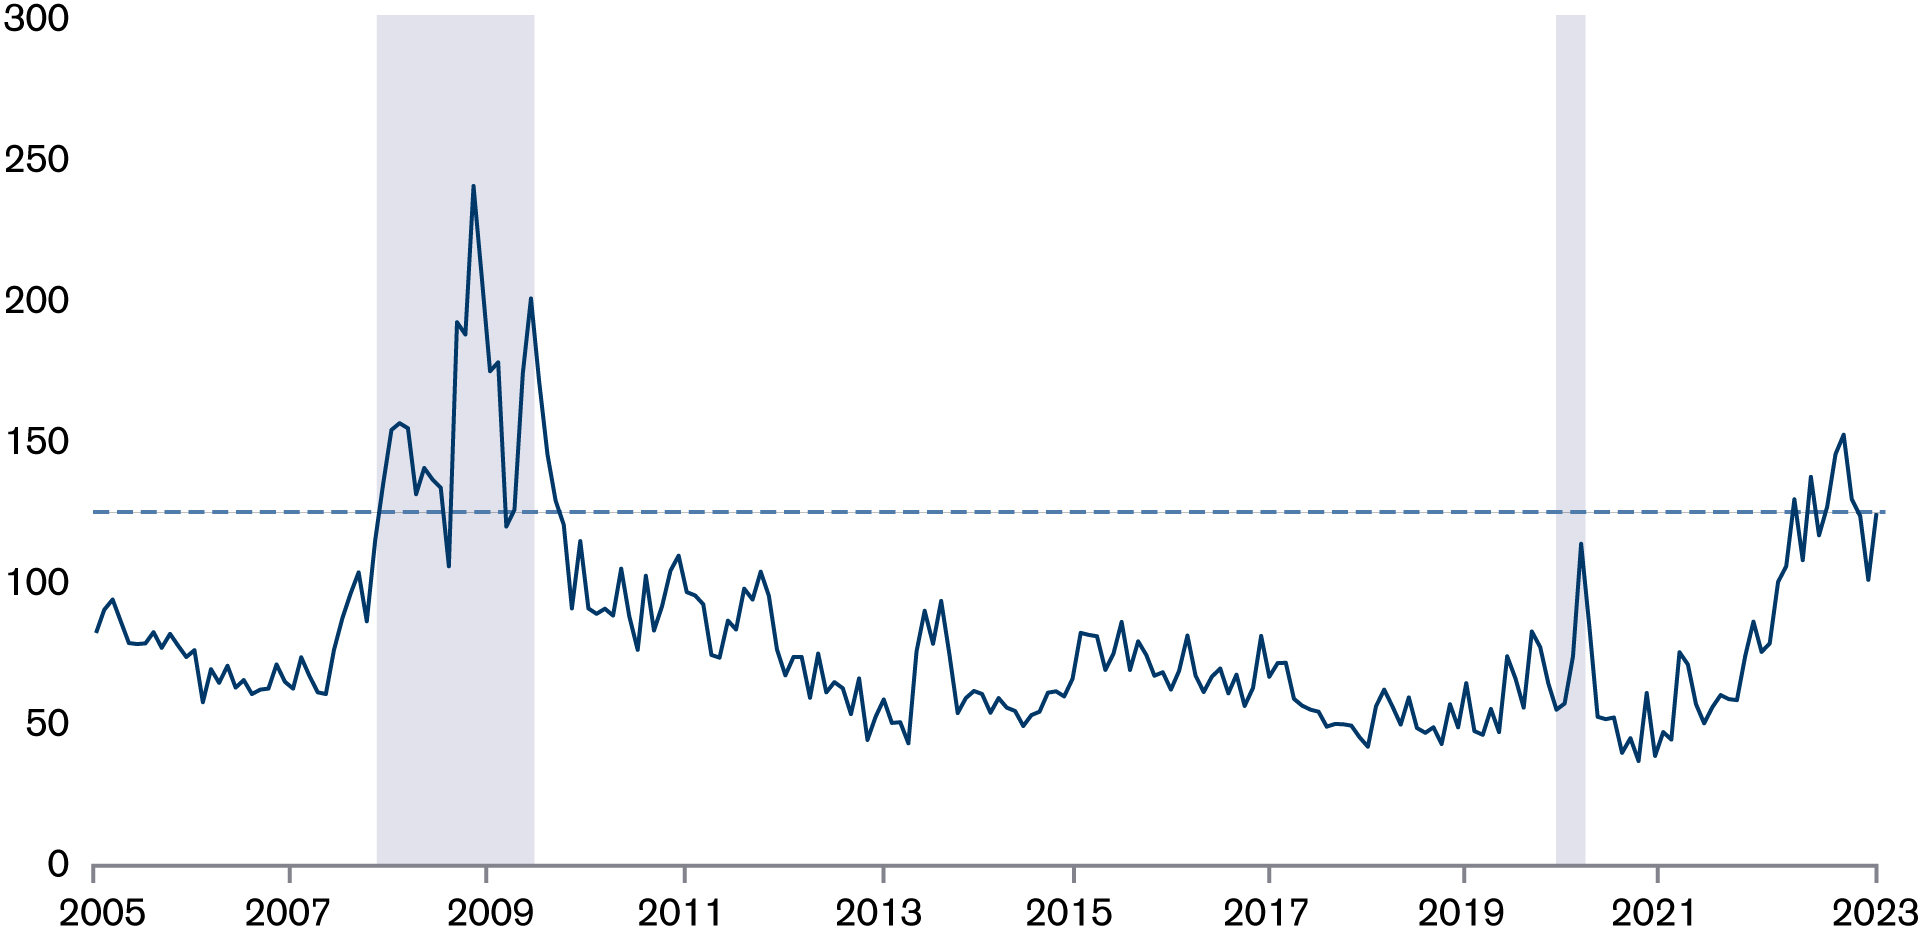 A time series of interest-rate volatility from 2005 through 2022.